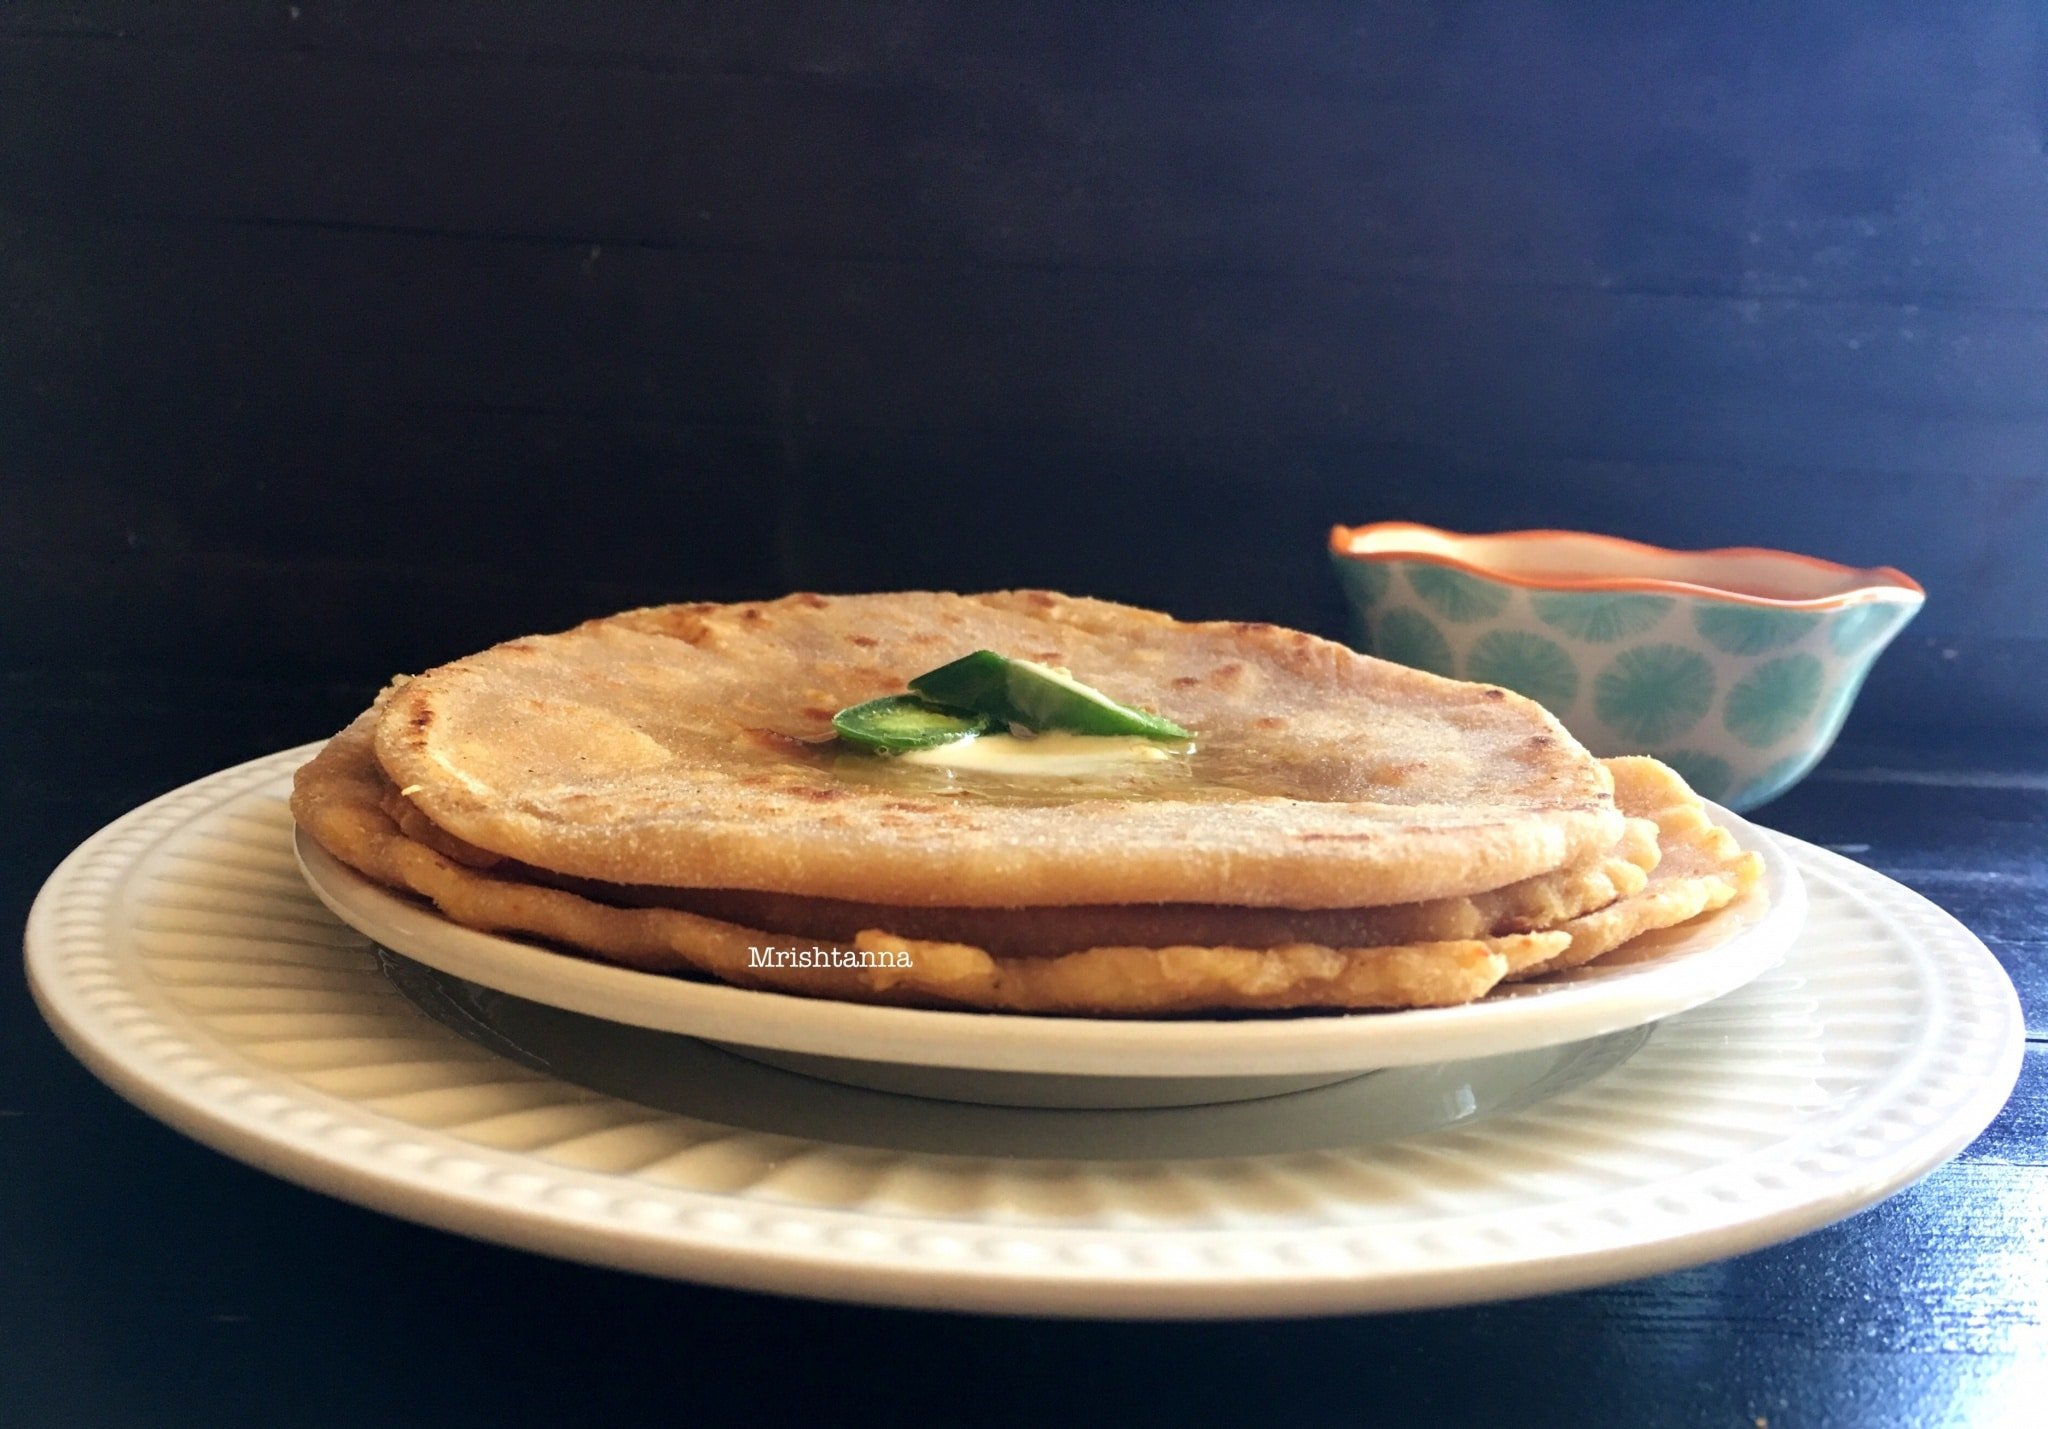 Sweet potato paratha is sitting on top of a plate on a table